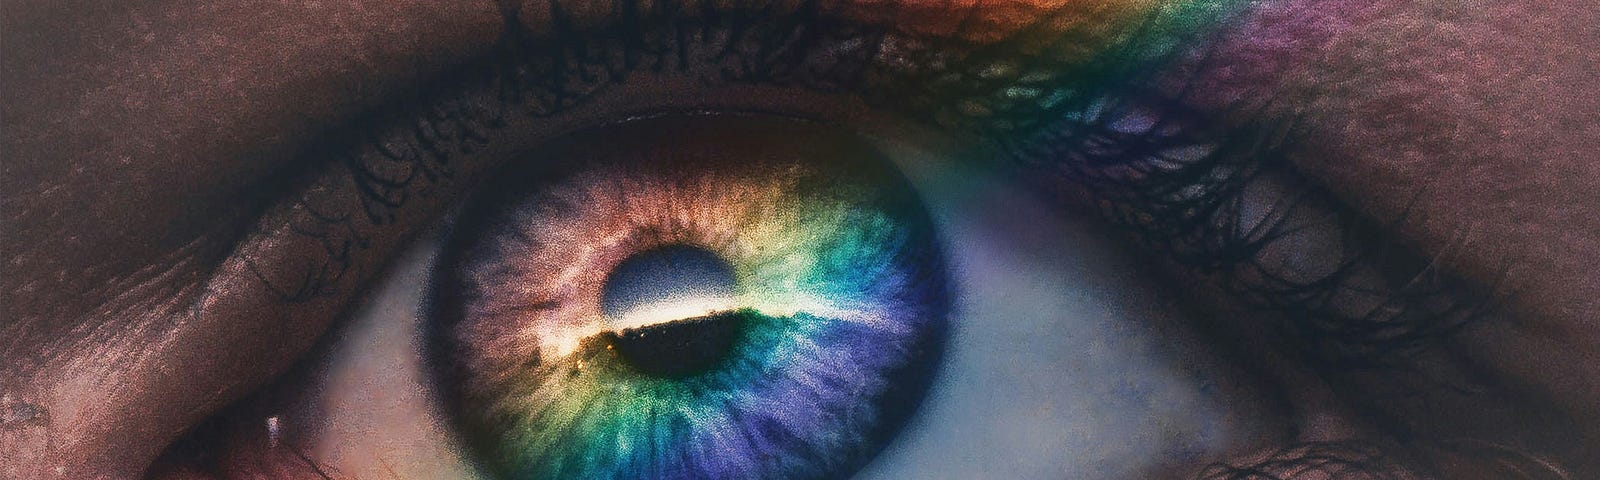 A close up of an eye with a rainbow shining across it, sparkling in the pupil.